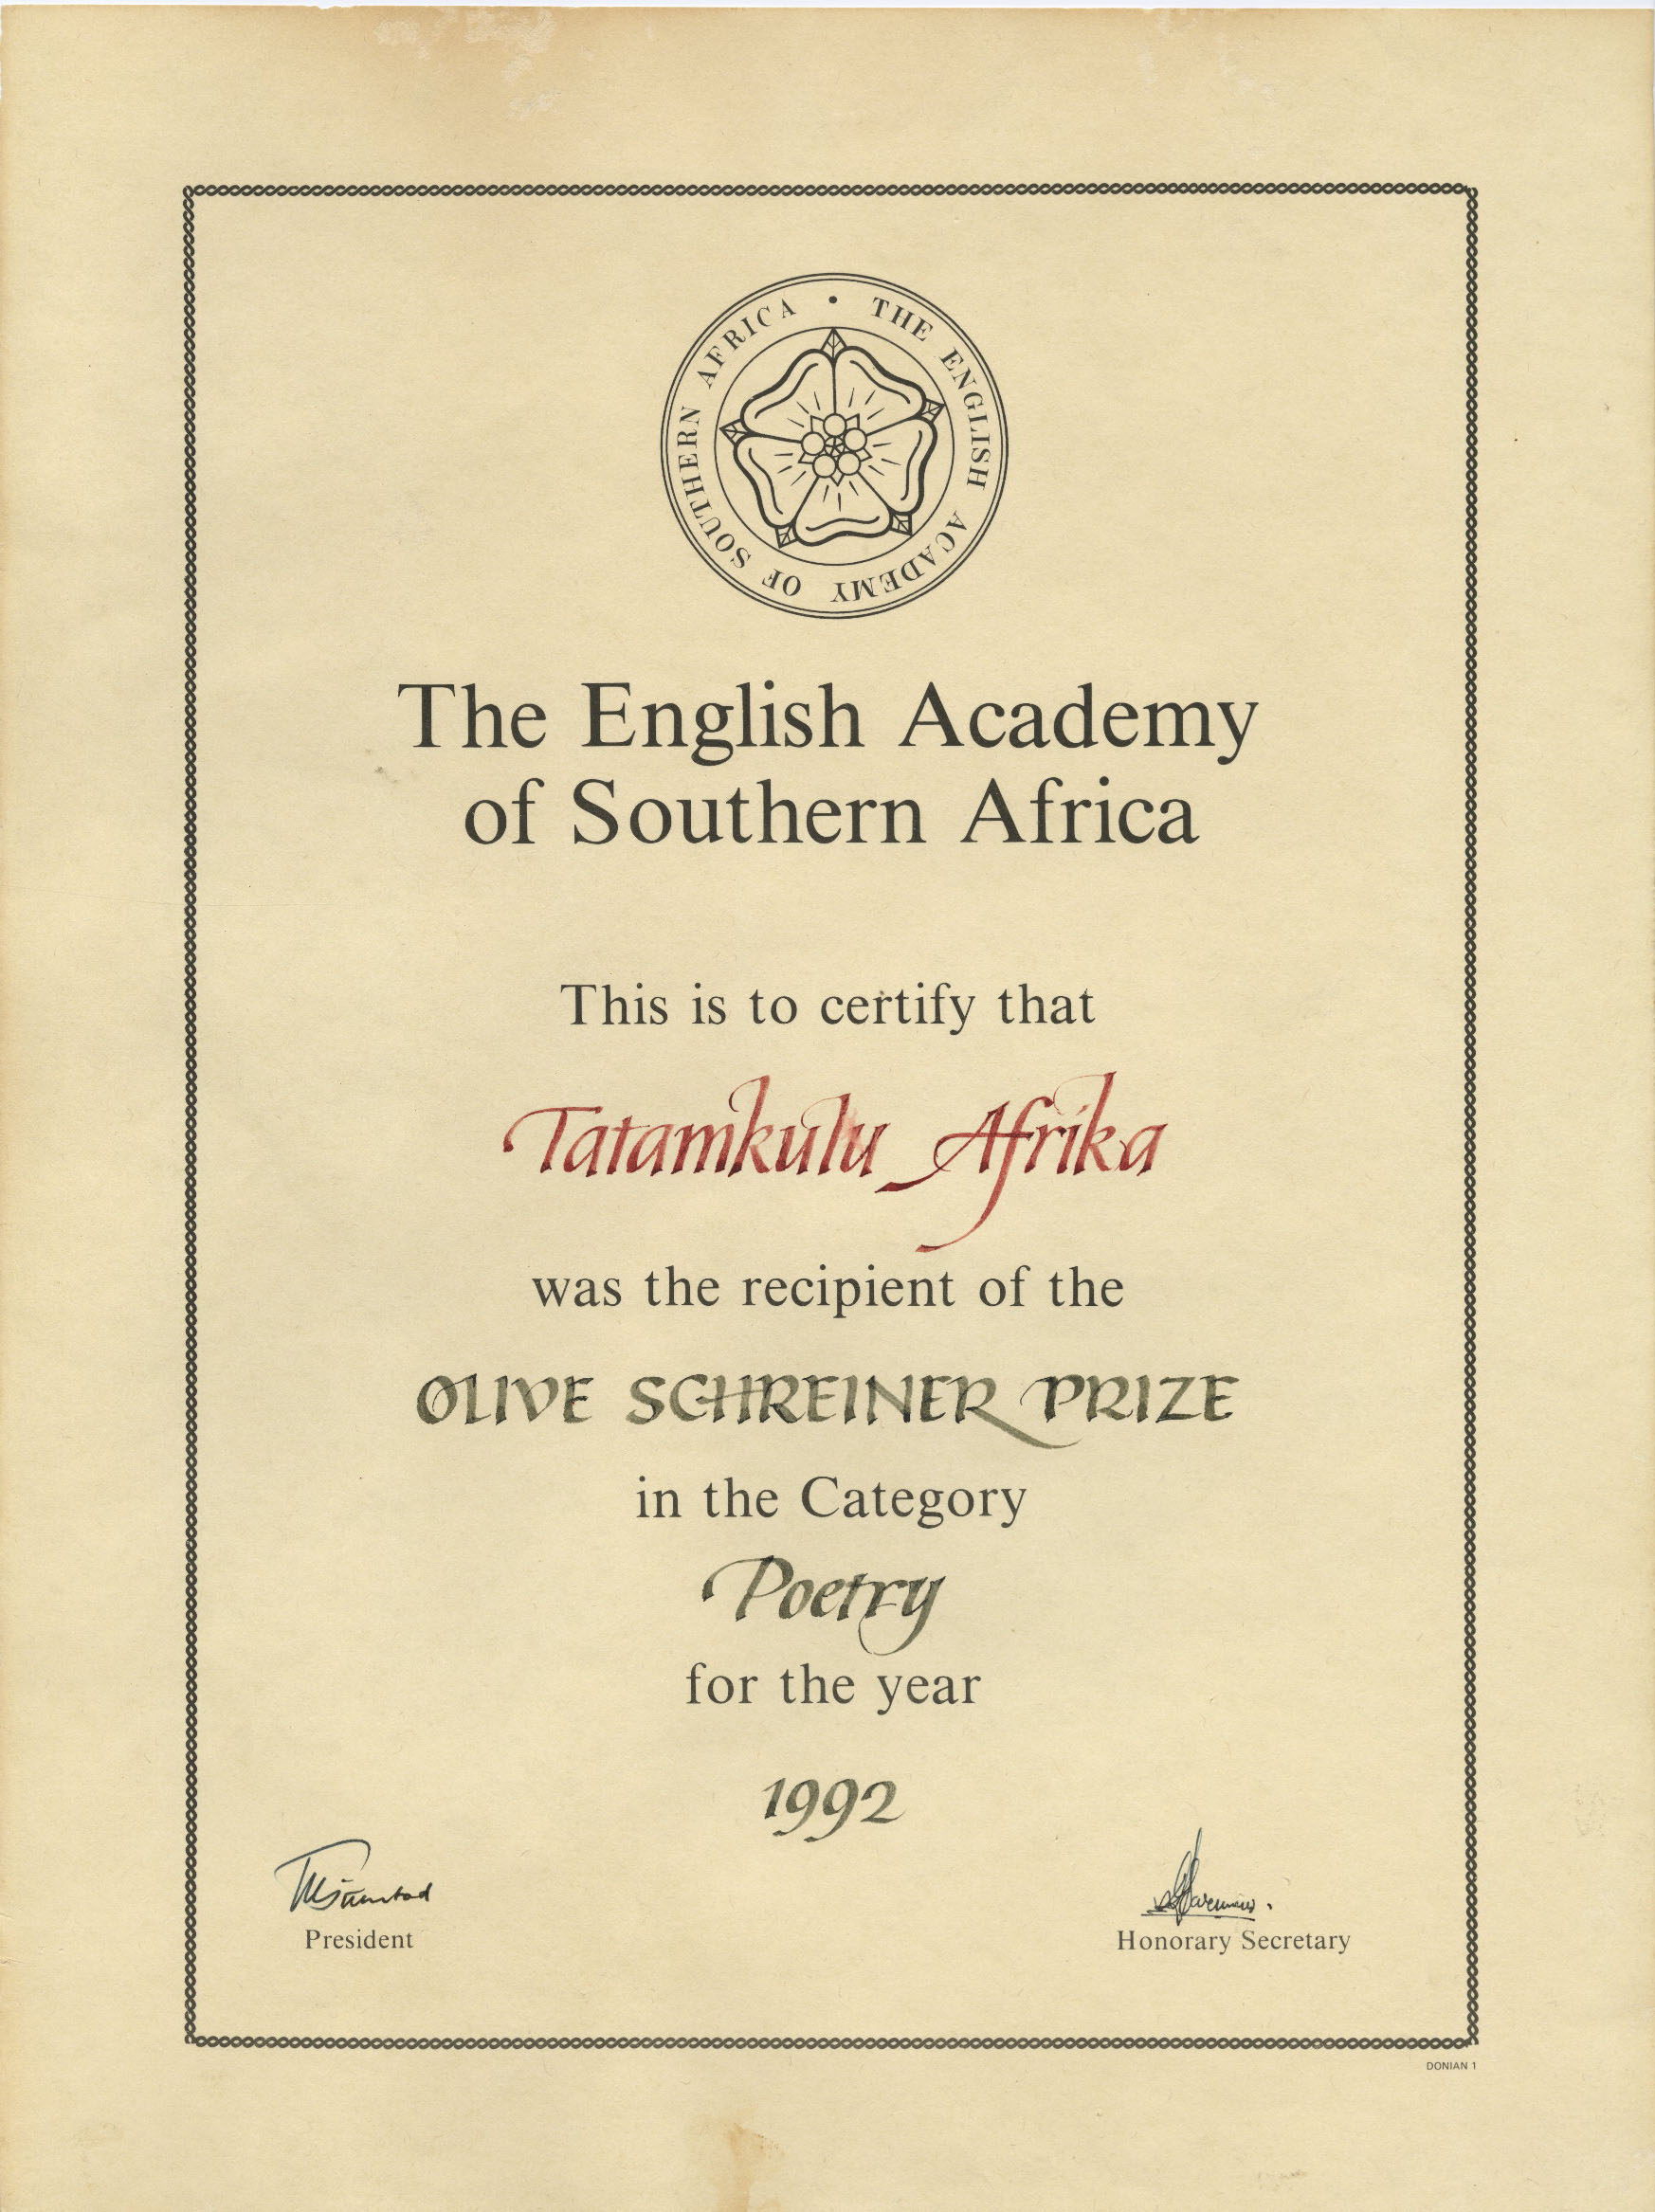 Afrika won many of South Africa’s important literary awards, including the Arthur Nortje Award, the Sydney Clouts Memorial Prize, the Thomas Pringle Award, the CNA Literary Award, the Olive Schreiner Prize for Poetry, the Sanlam Literary Award (unrestricted category) and the Molteno Medal (gold) for lifetime services to literature.